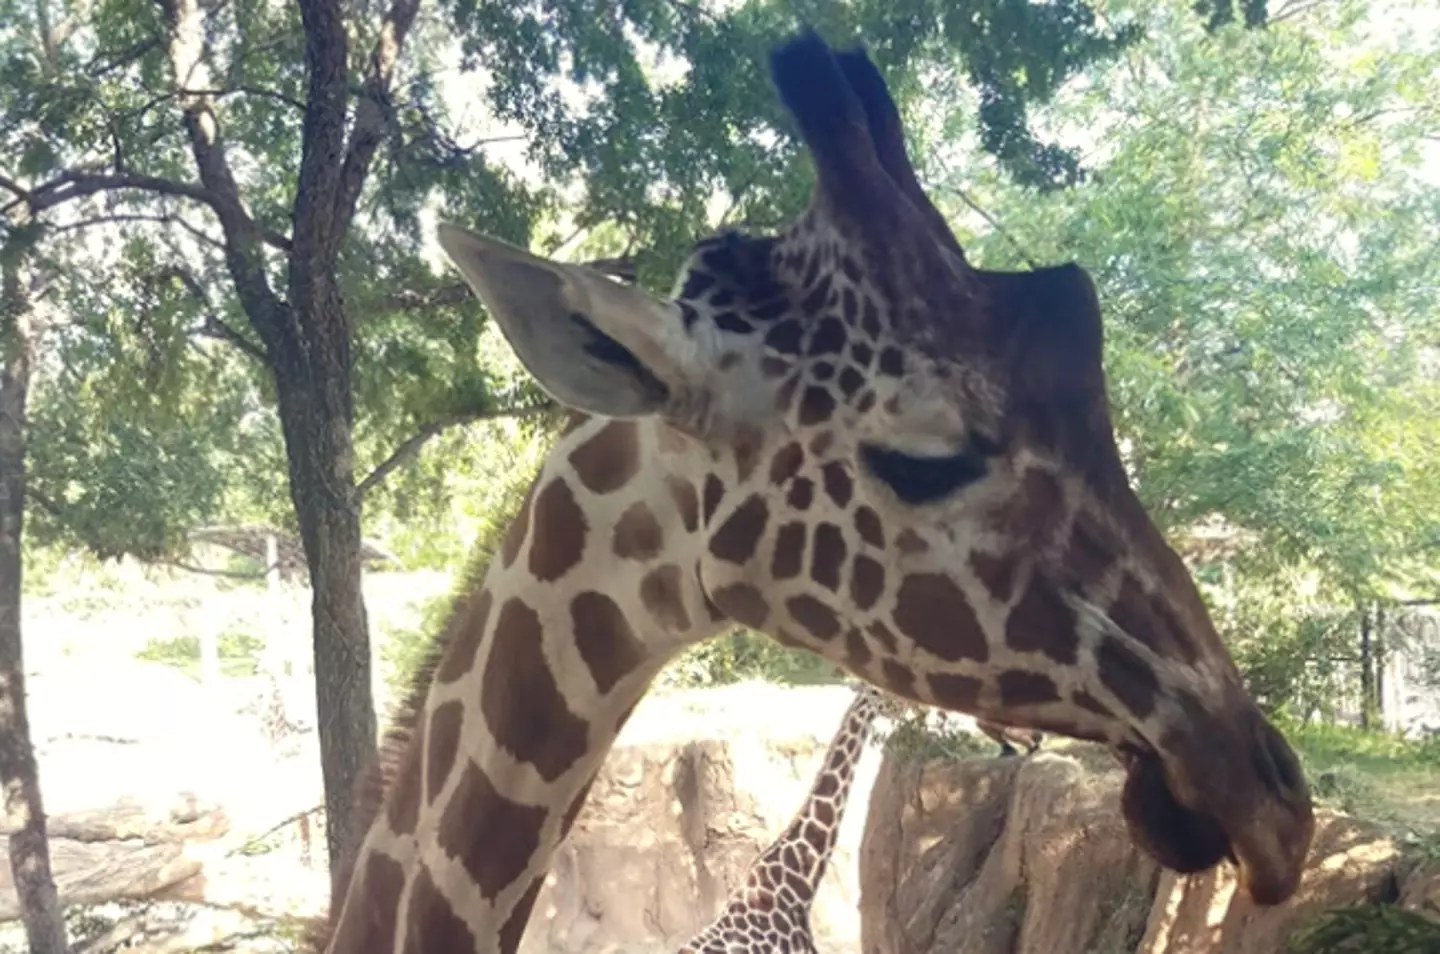 Ferrell was one of the zoo's six giraffes.